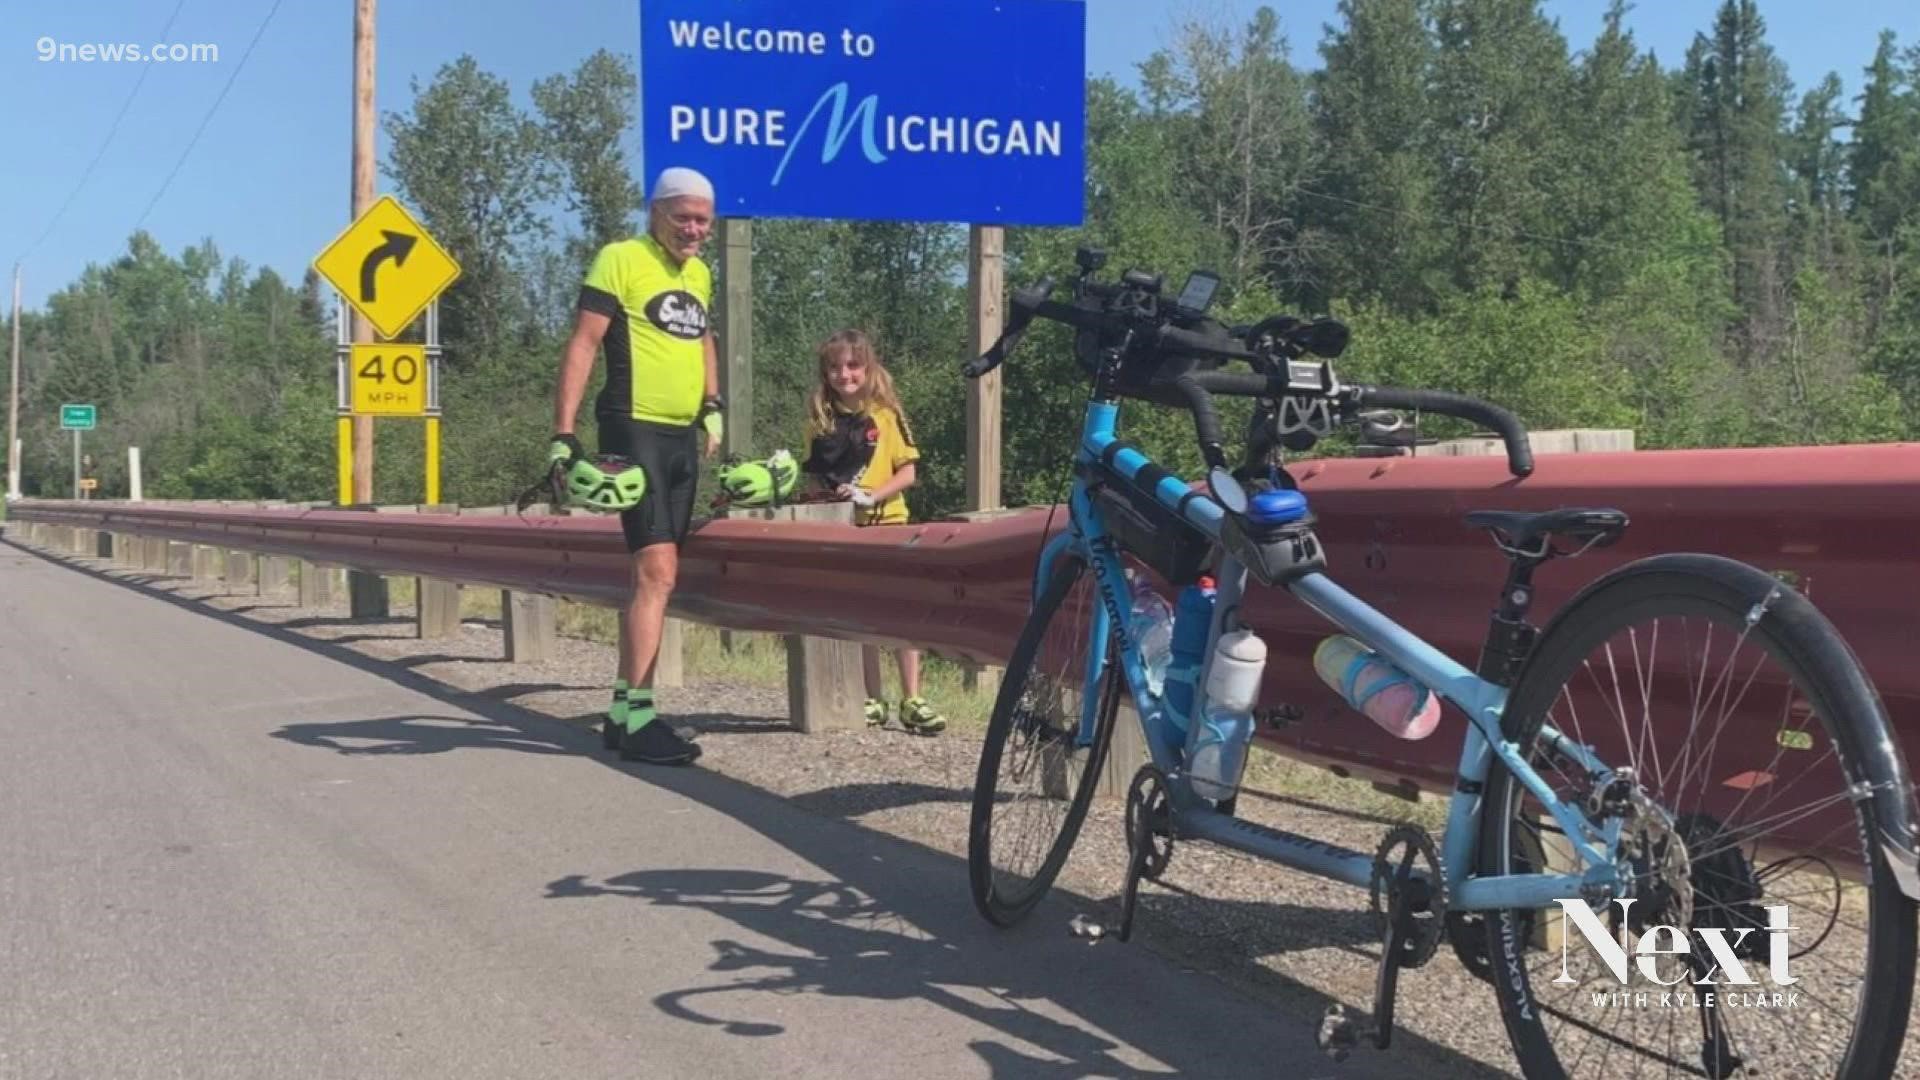 Kevin Sanderford and his nine-year-old daughter Abby spent two months biking more than 4,000 miles from Washington to Maine – raising $30,000 to fight breast cancer.